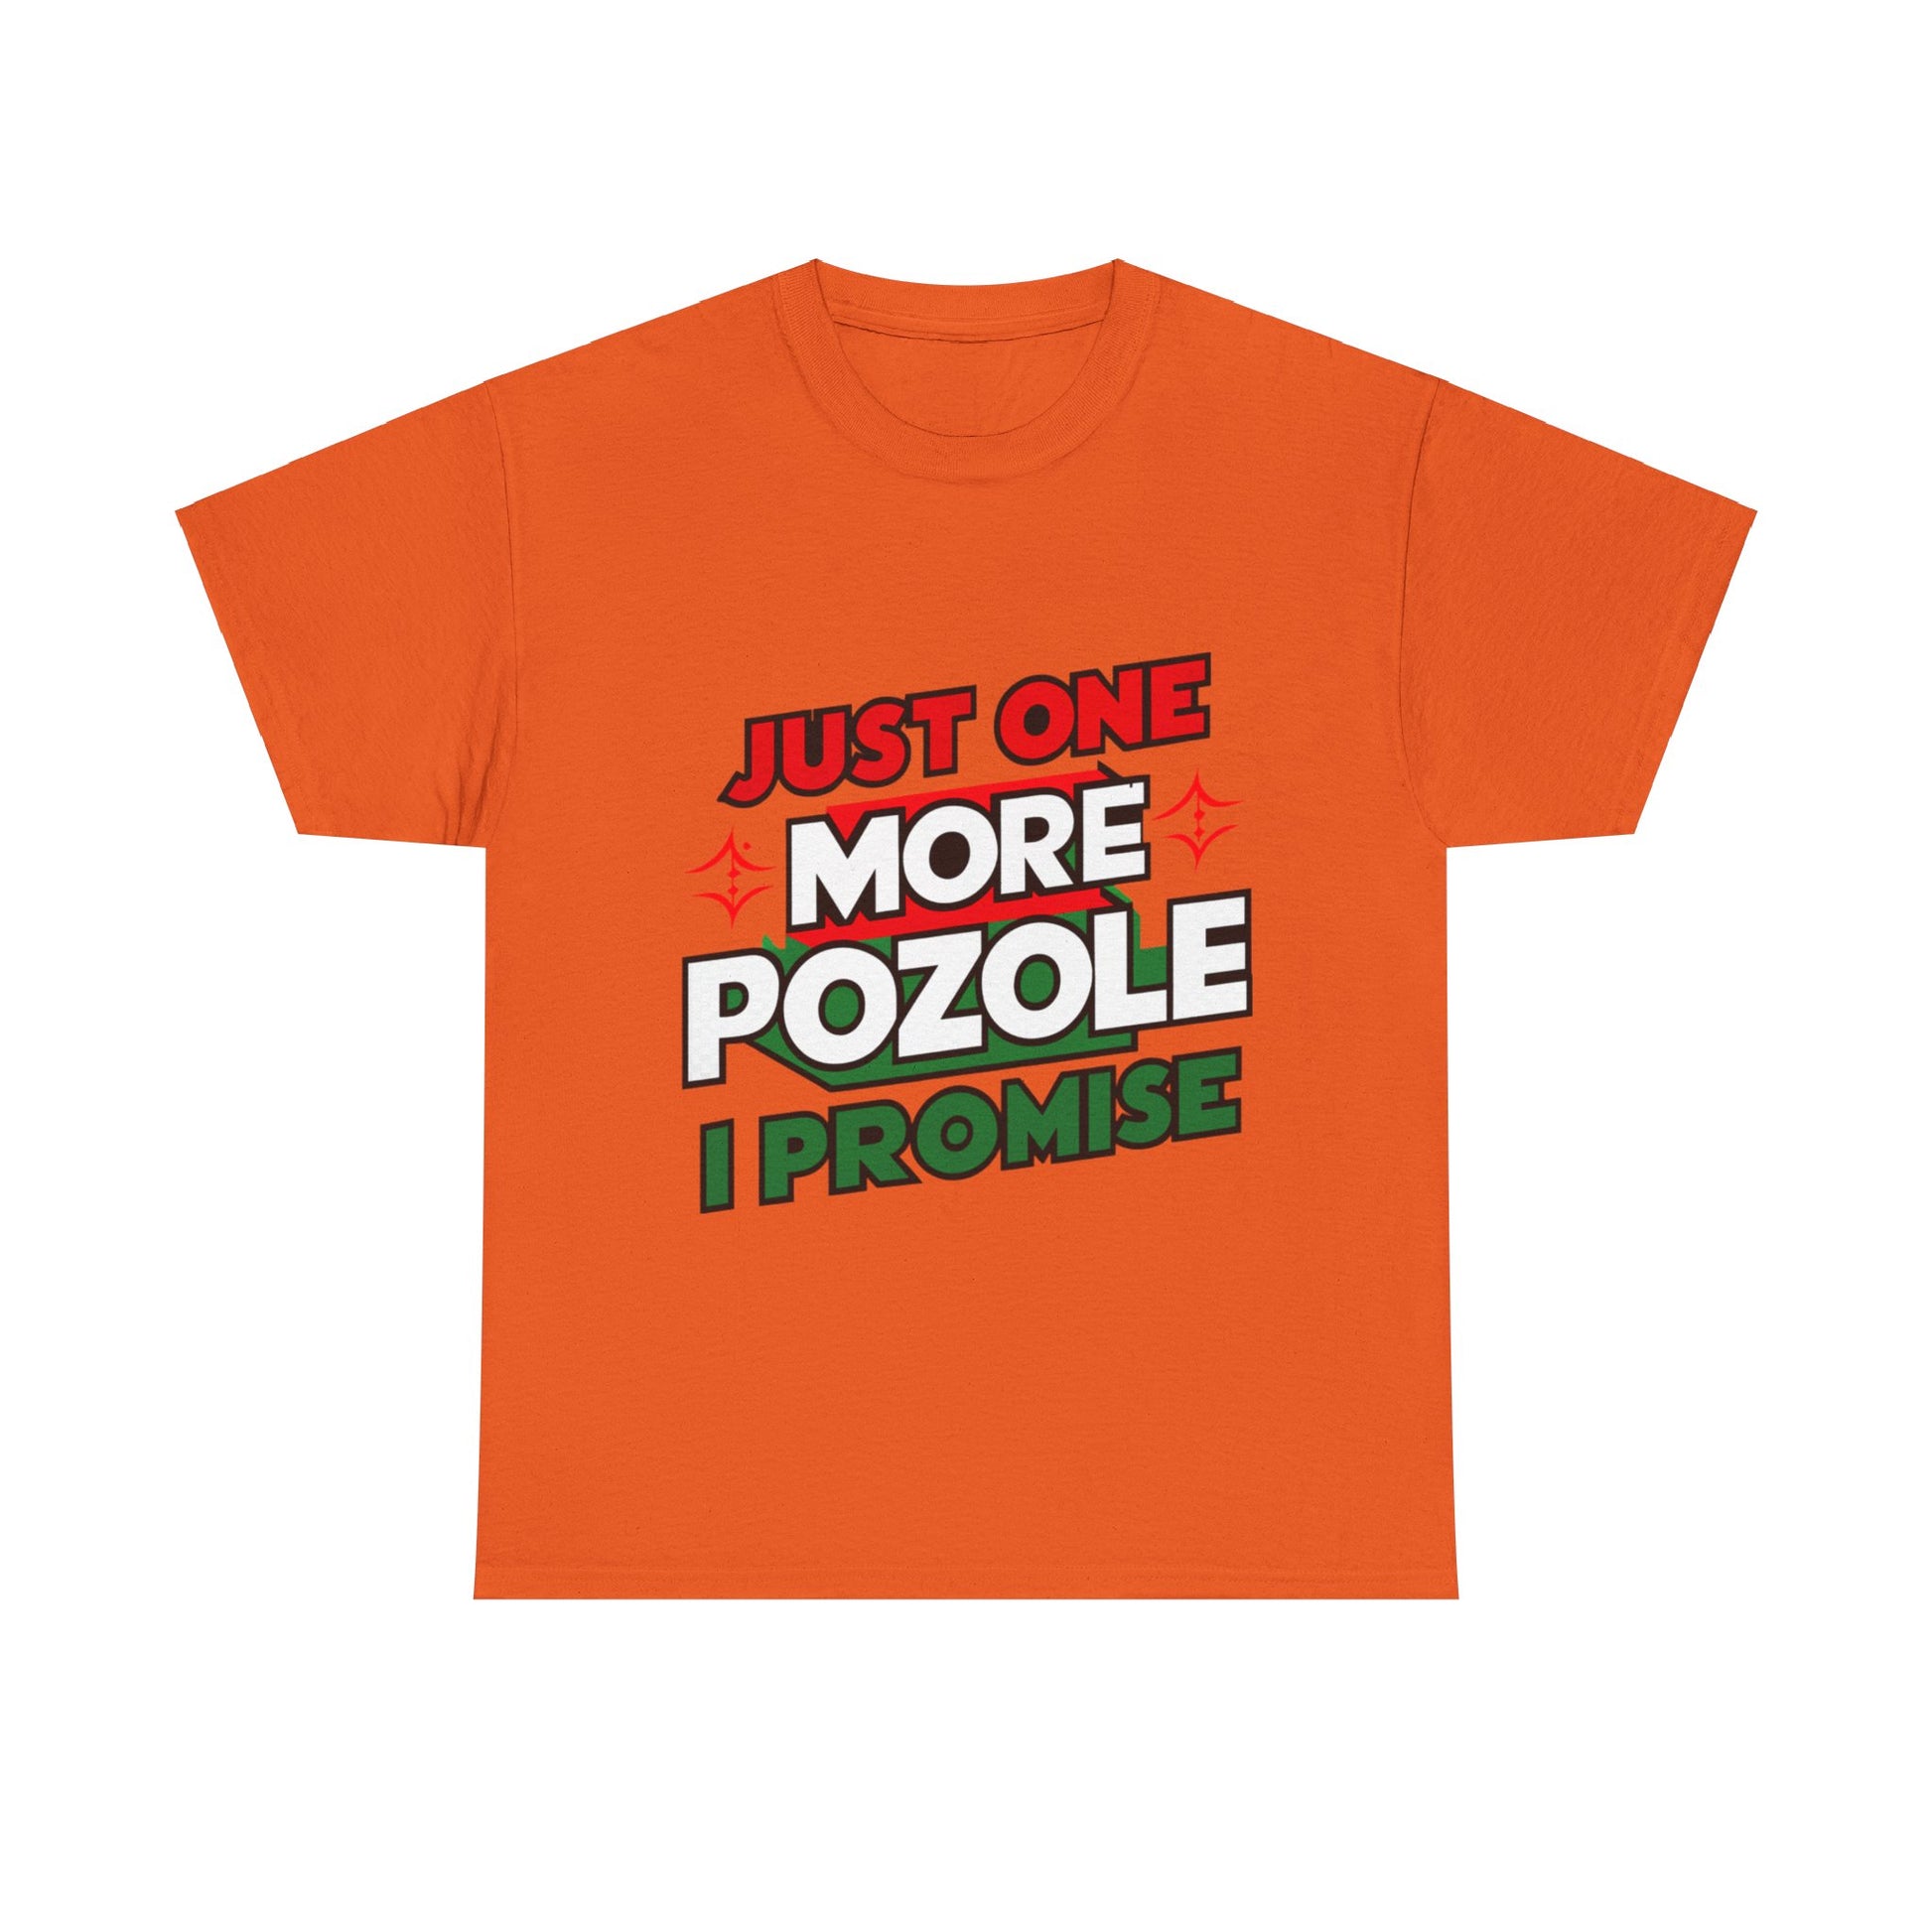 Just One More Pozole I Promise Mexican Food Graphic Unisex Heavy Cotton Tee Cotton Funny Humorous Graphic Soft Premium Unisex Men Women Orange T-shirt Birthday Gift-6